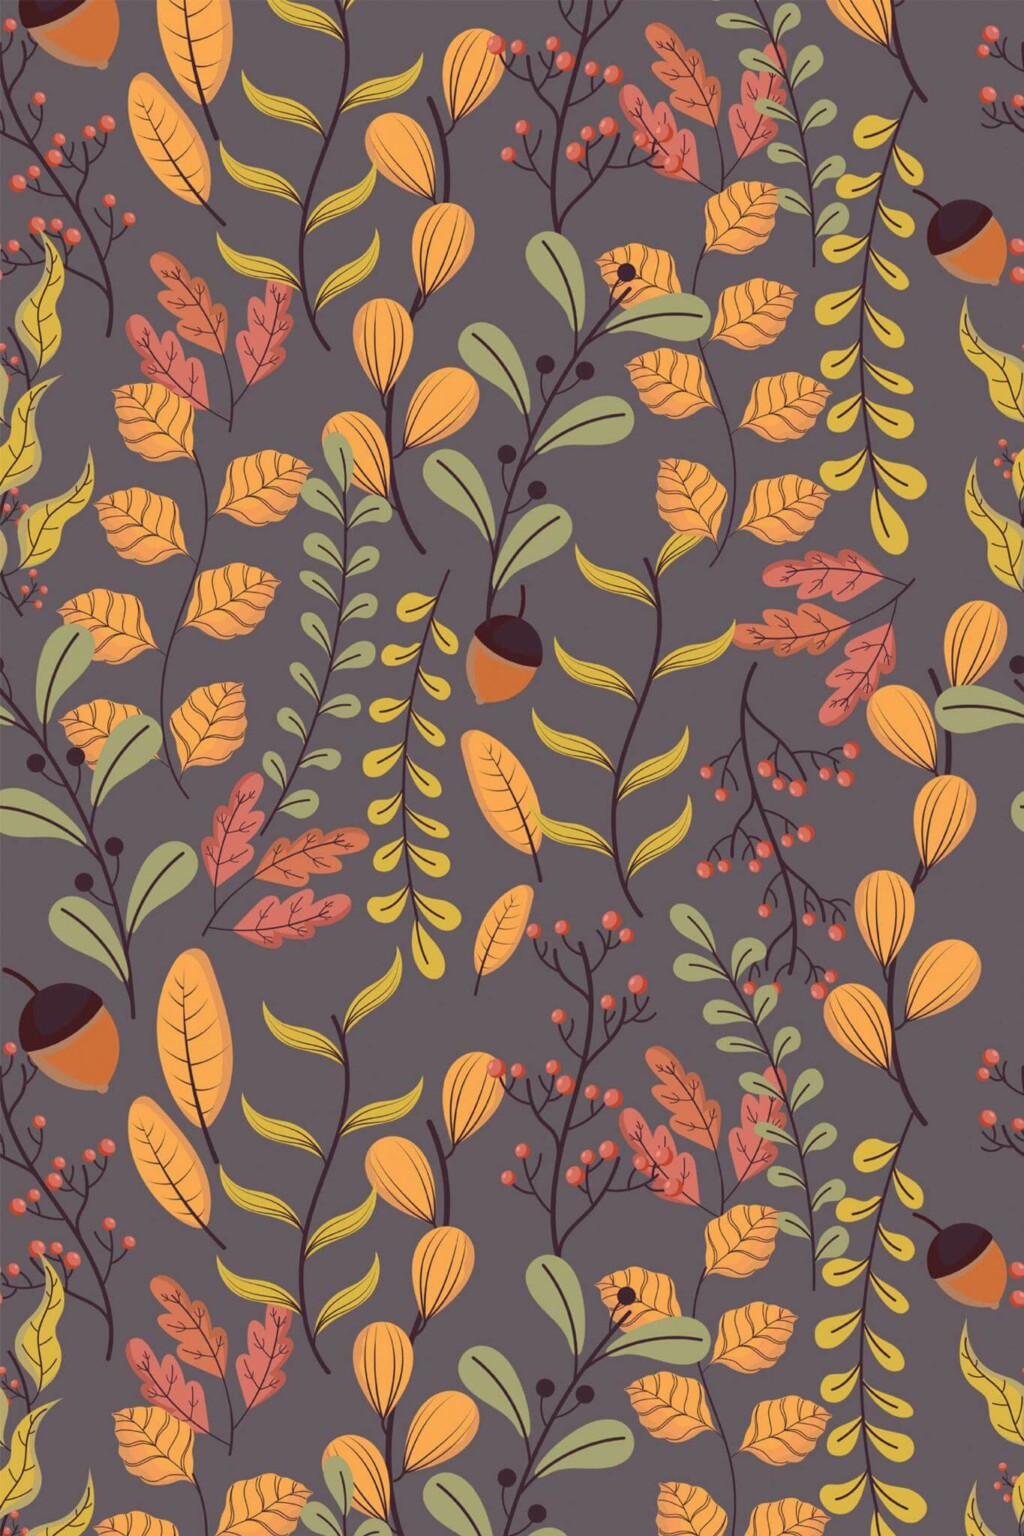 Boho fall Wallpaper - Peel and Stick or Non-Pasted